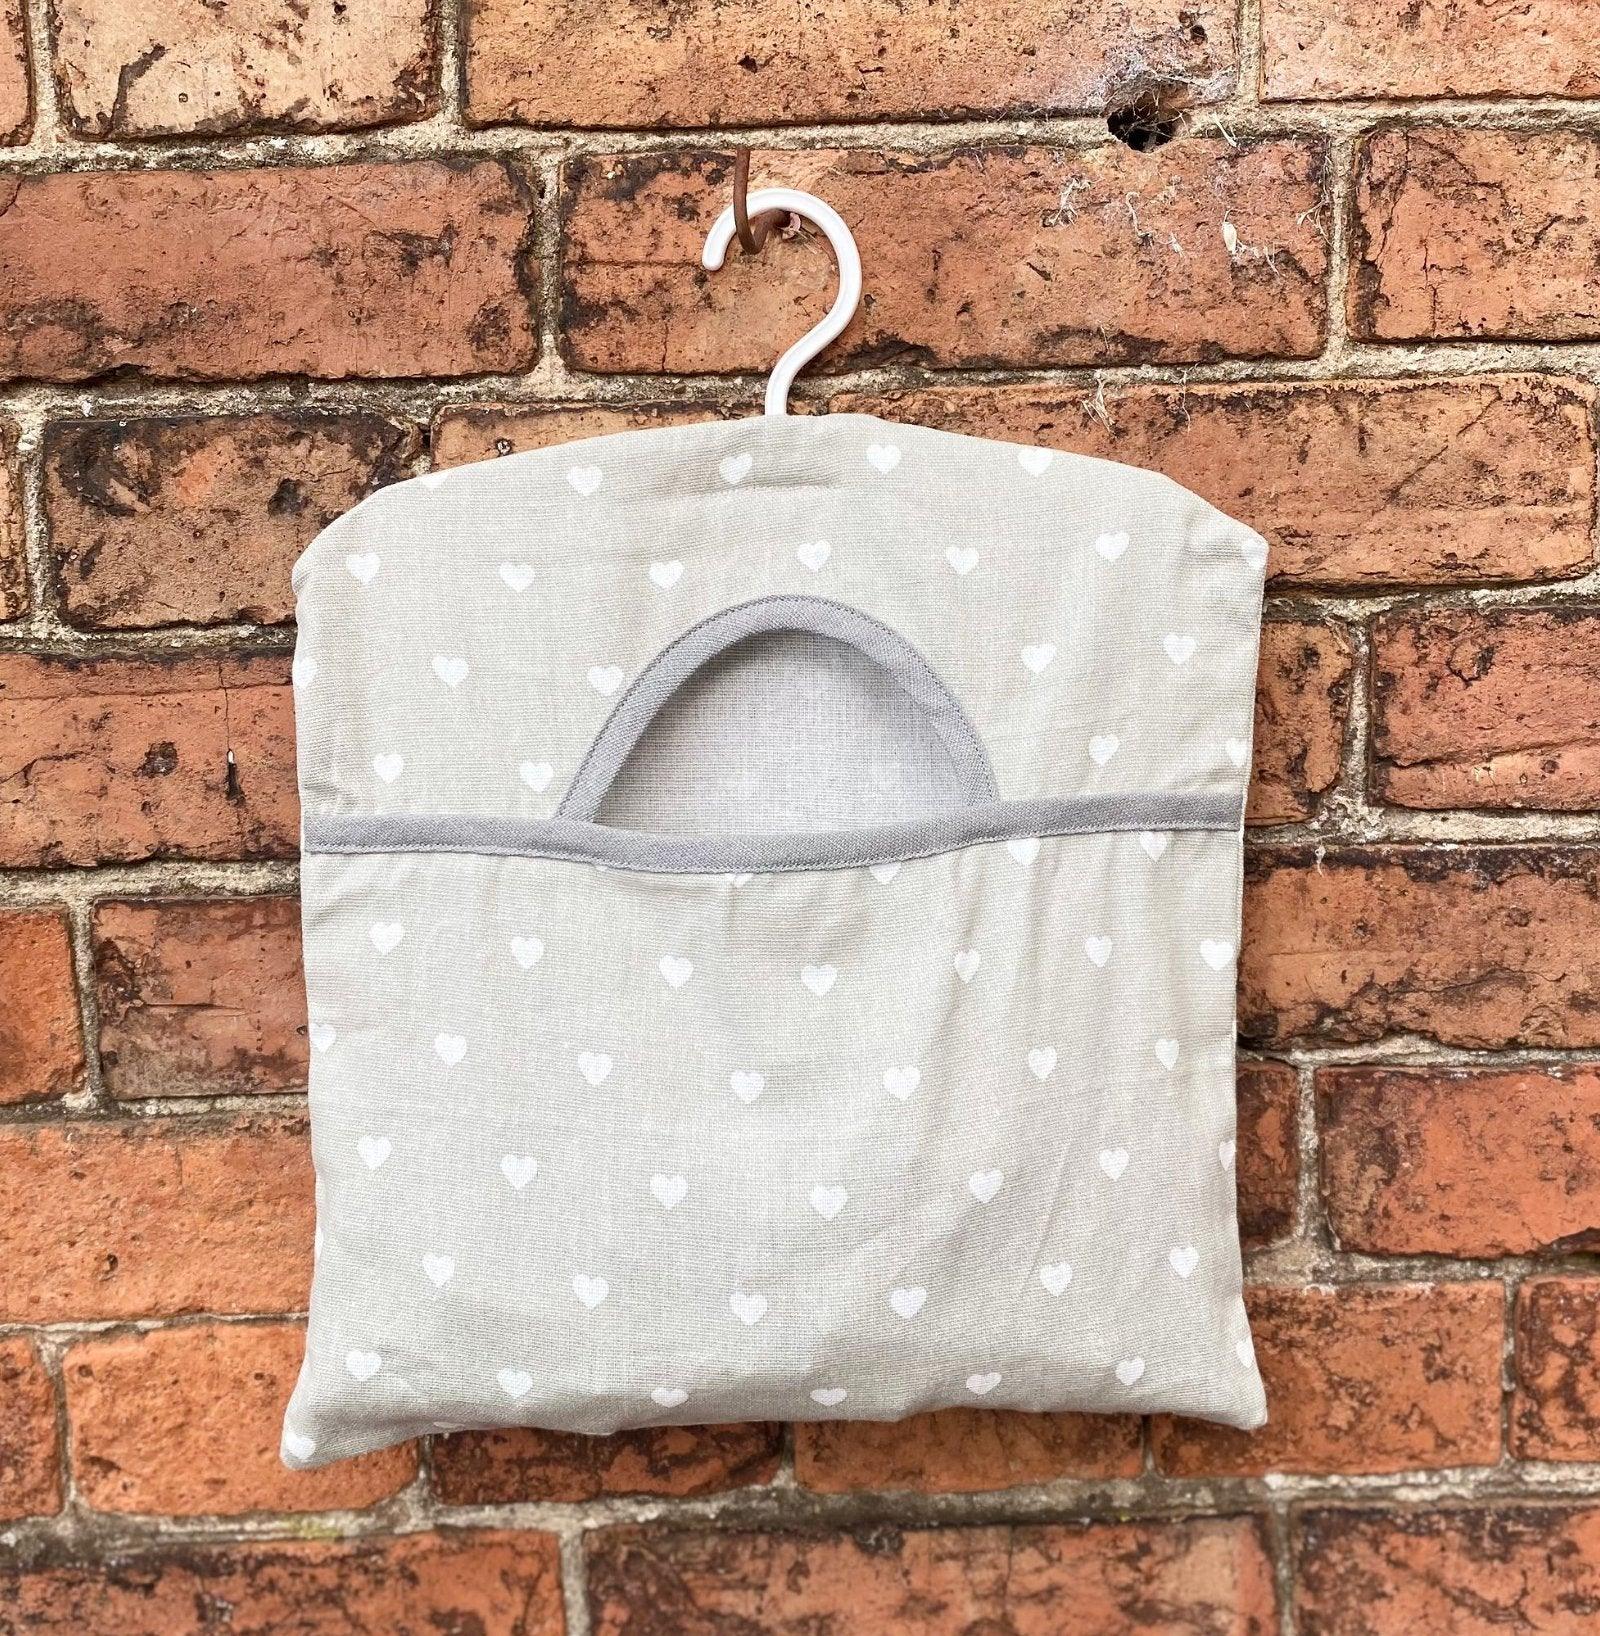 View Cotton Peg Bag With Grey Hearts Design information